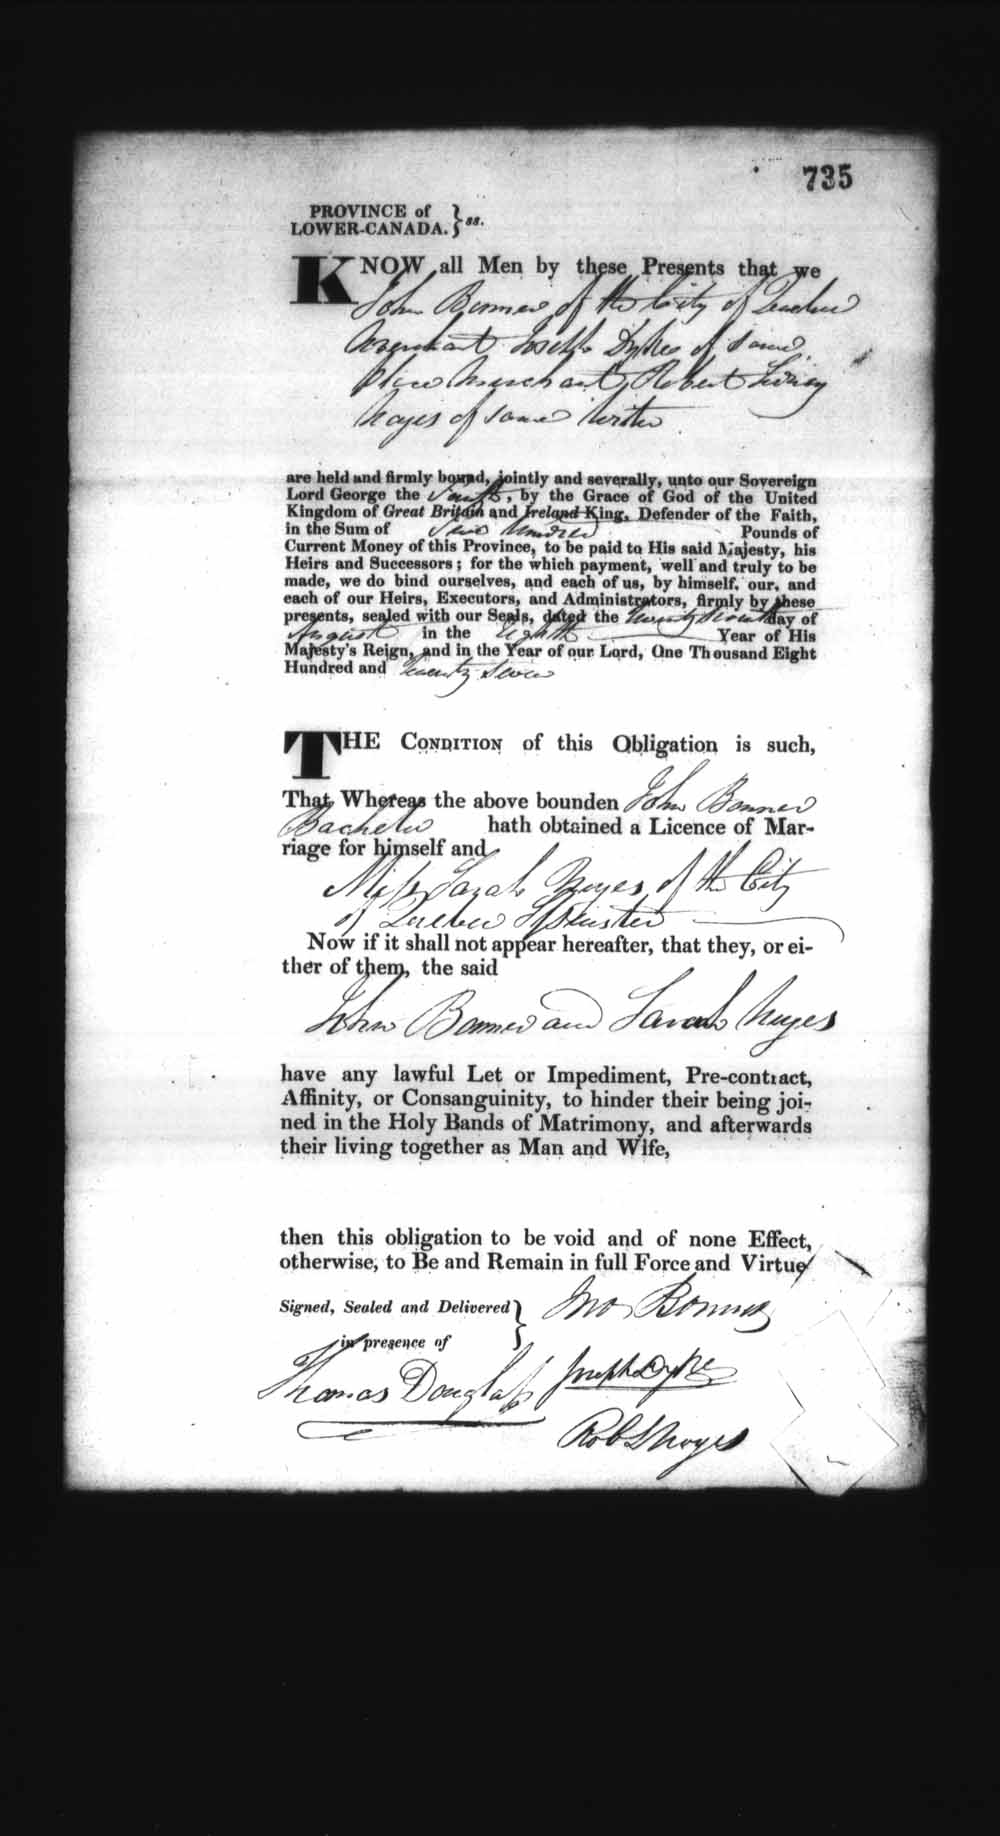 Digitized page of Upper and Lower Canada Marriage Bonds (1779-1865) for Image No.: e008236799